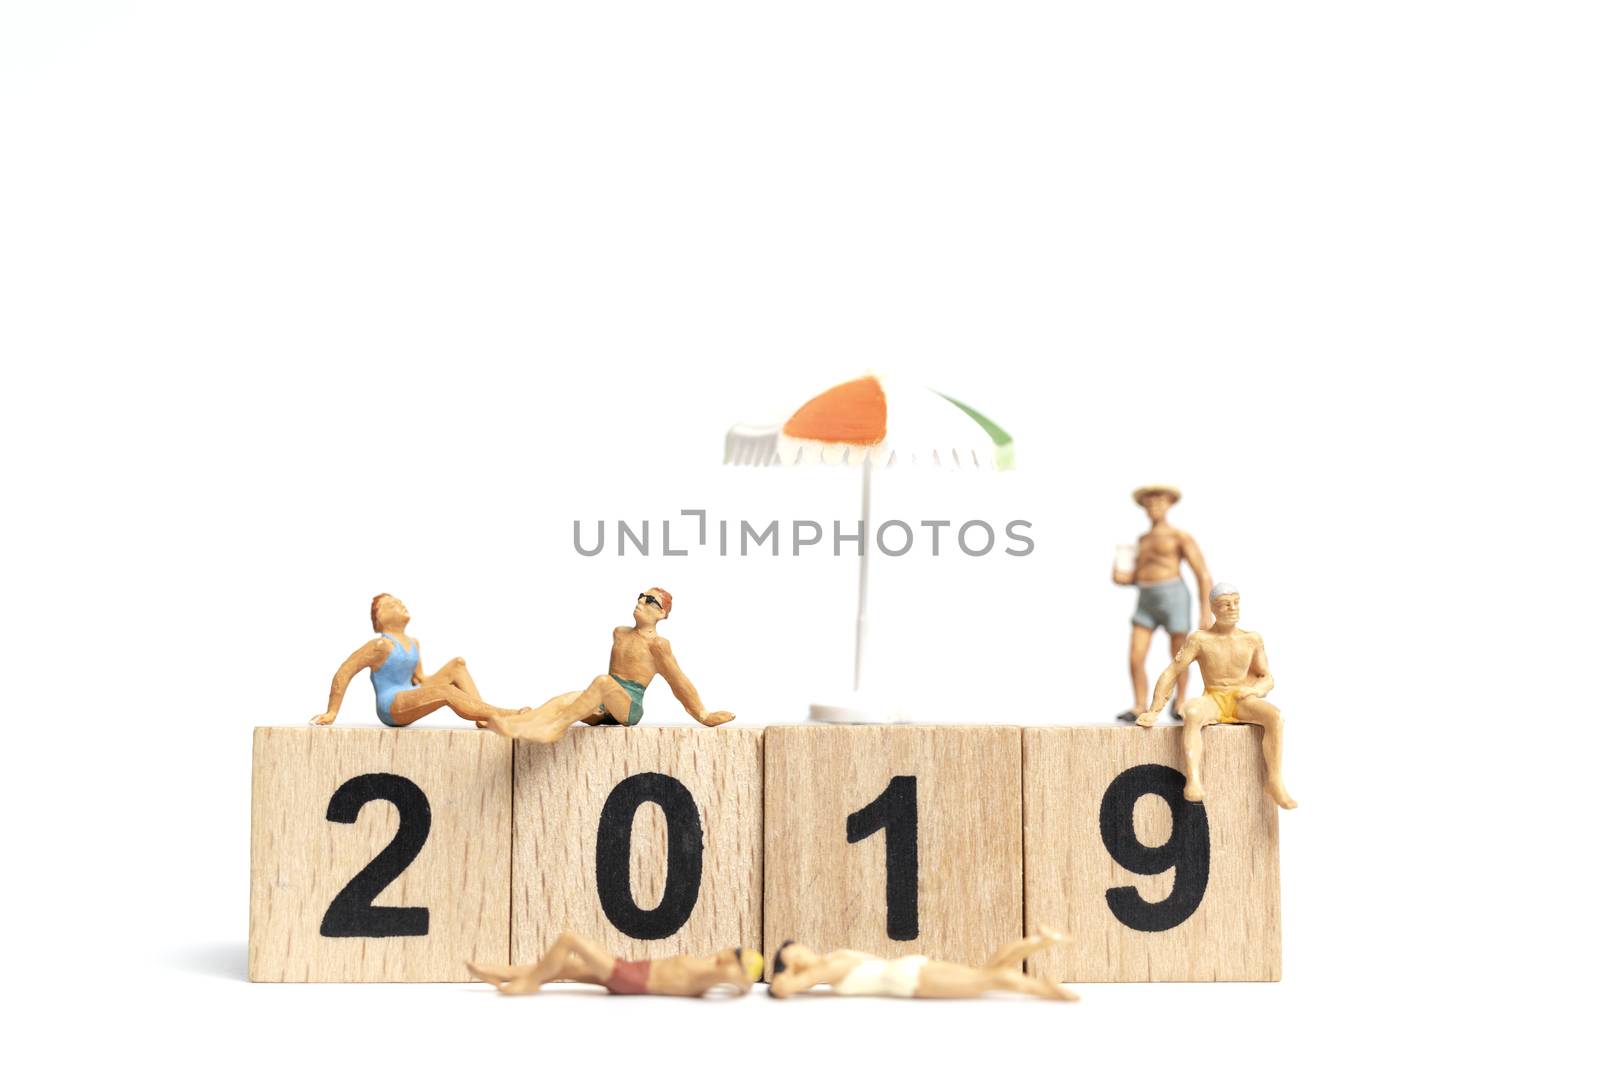 Miniature people wearing swimsuit relaxing on wooden block 2019 with white background